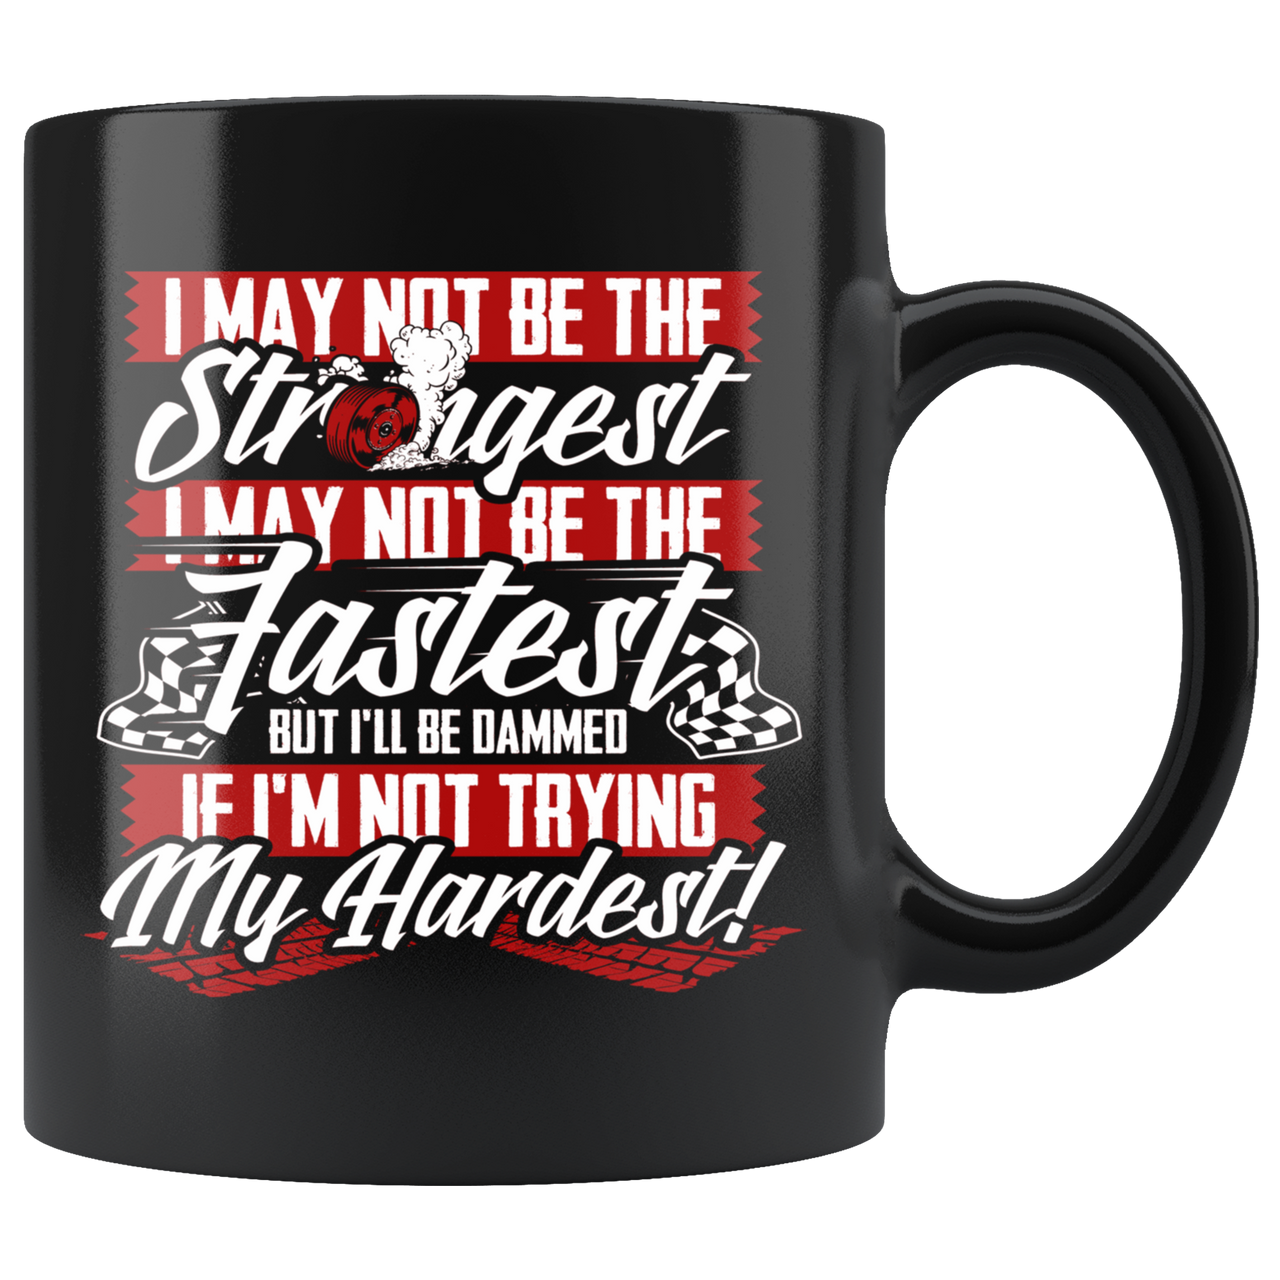 I May Not Be The Strongest I May Not Be The Fastest But I'll Be Damned If I'm Not Trying My Hardest Mug!